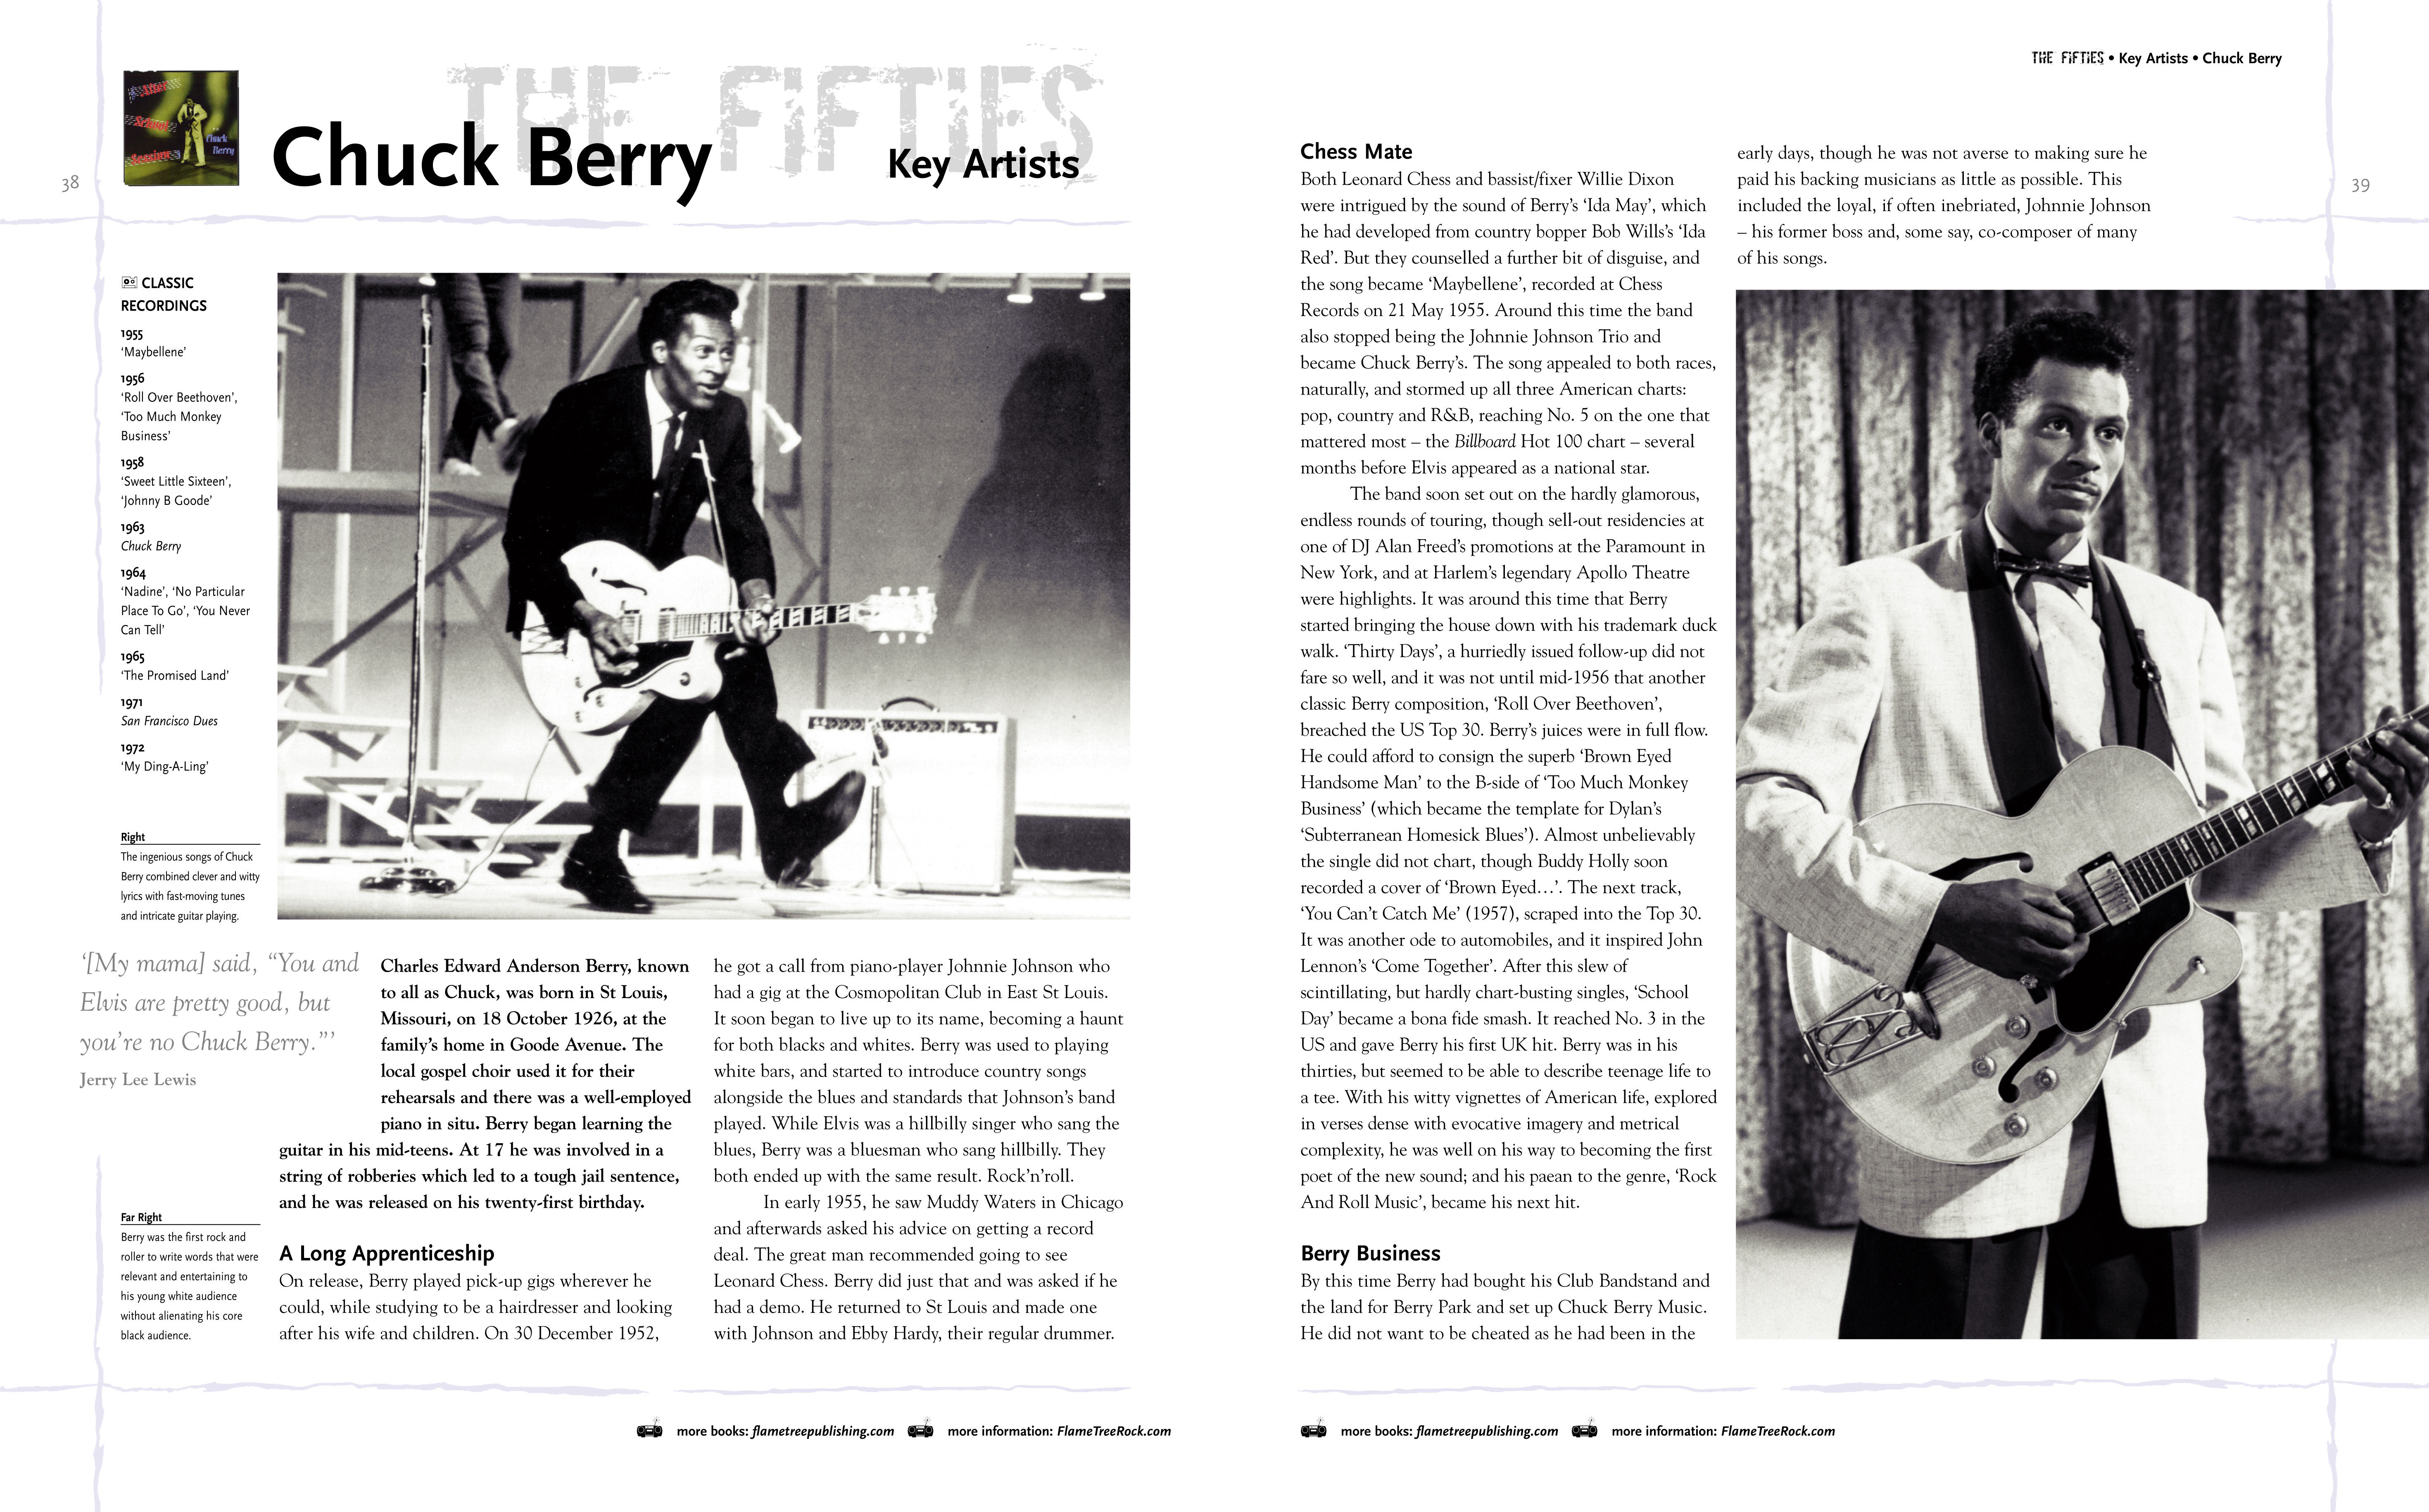 Classic Rock Bands spread, Chuck Berry